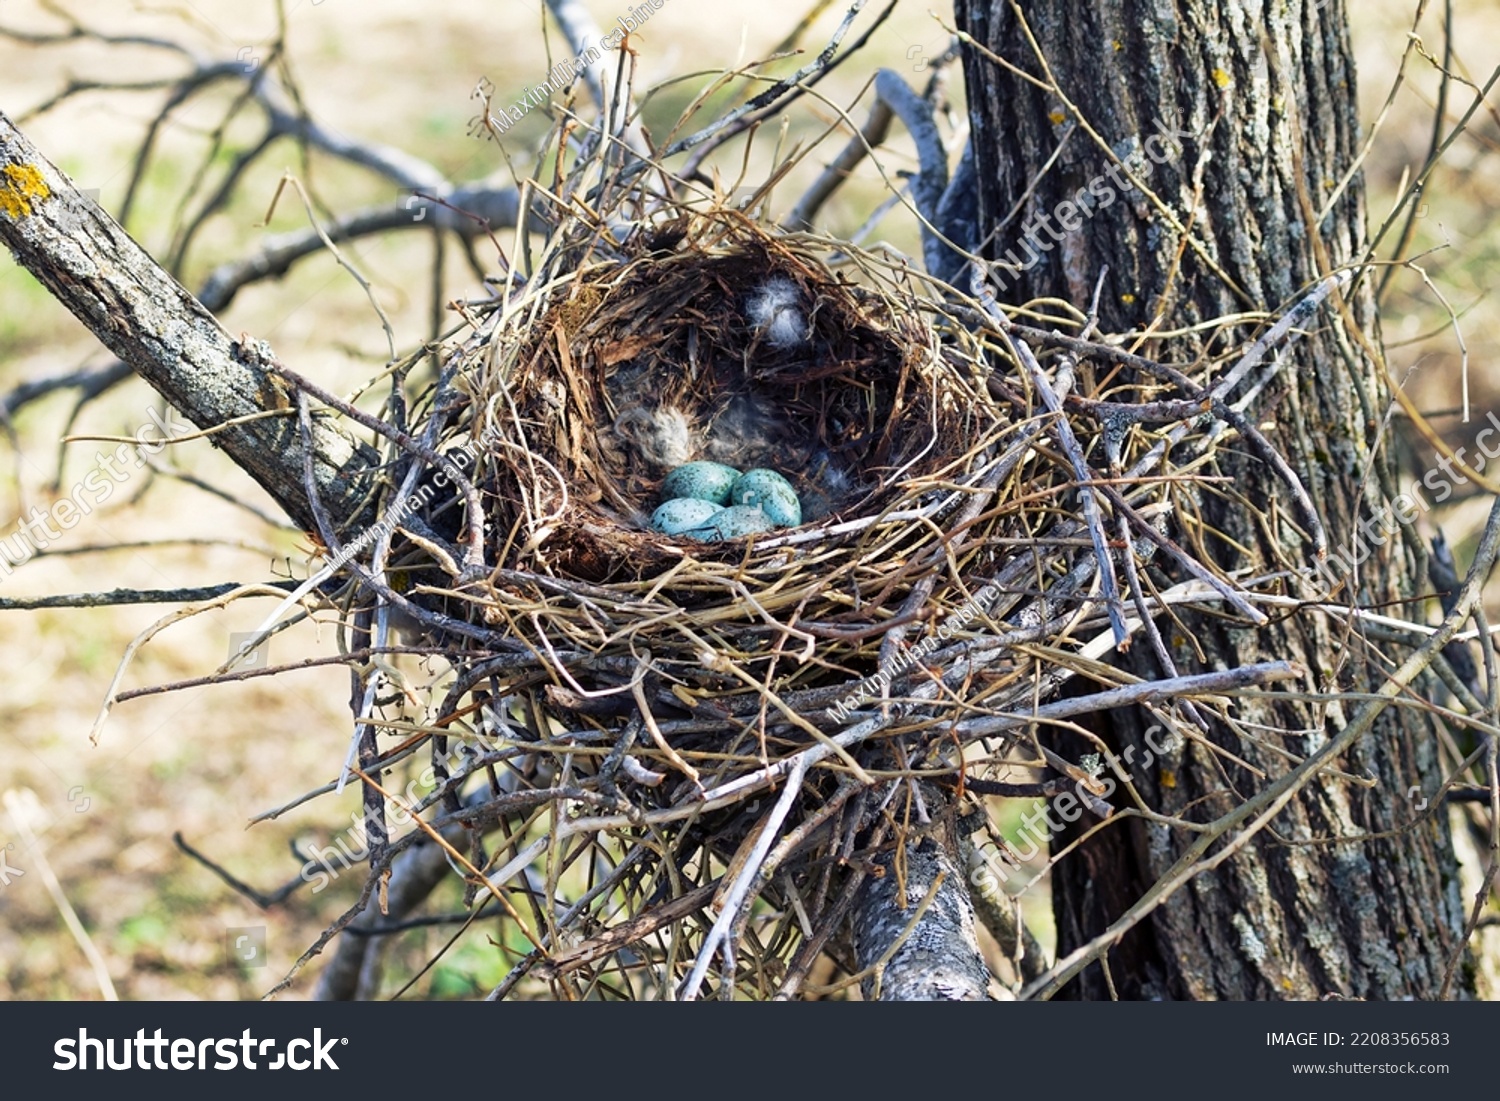 Nidology, study of birds nest. Hooded crow (Corvus cornix) nest. Clutch of 4 eggs. Hatching tray is made of grass, bast and lined with muskrat and hare fur #2208356583